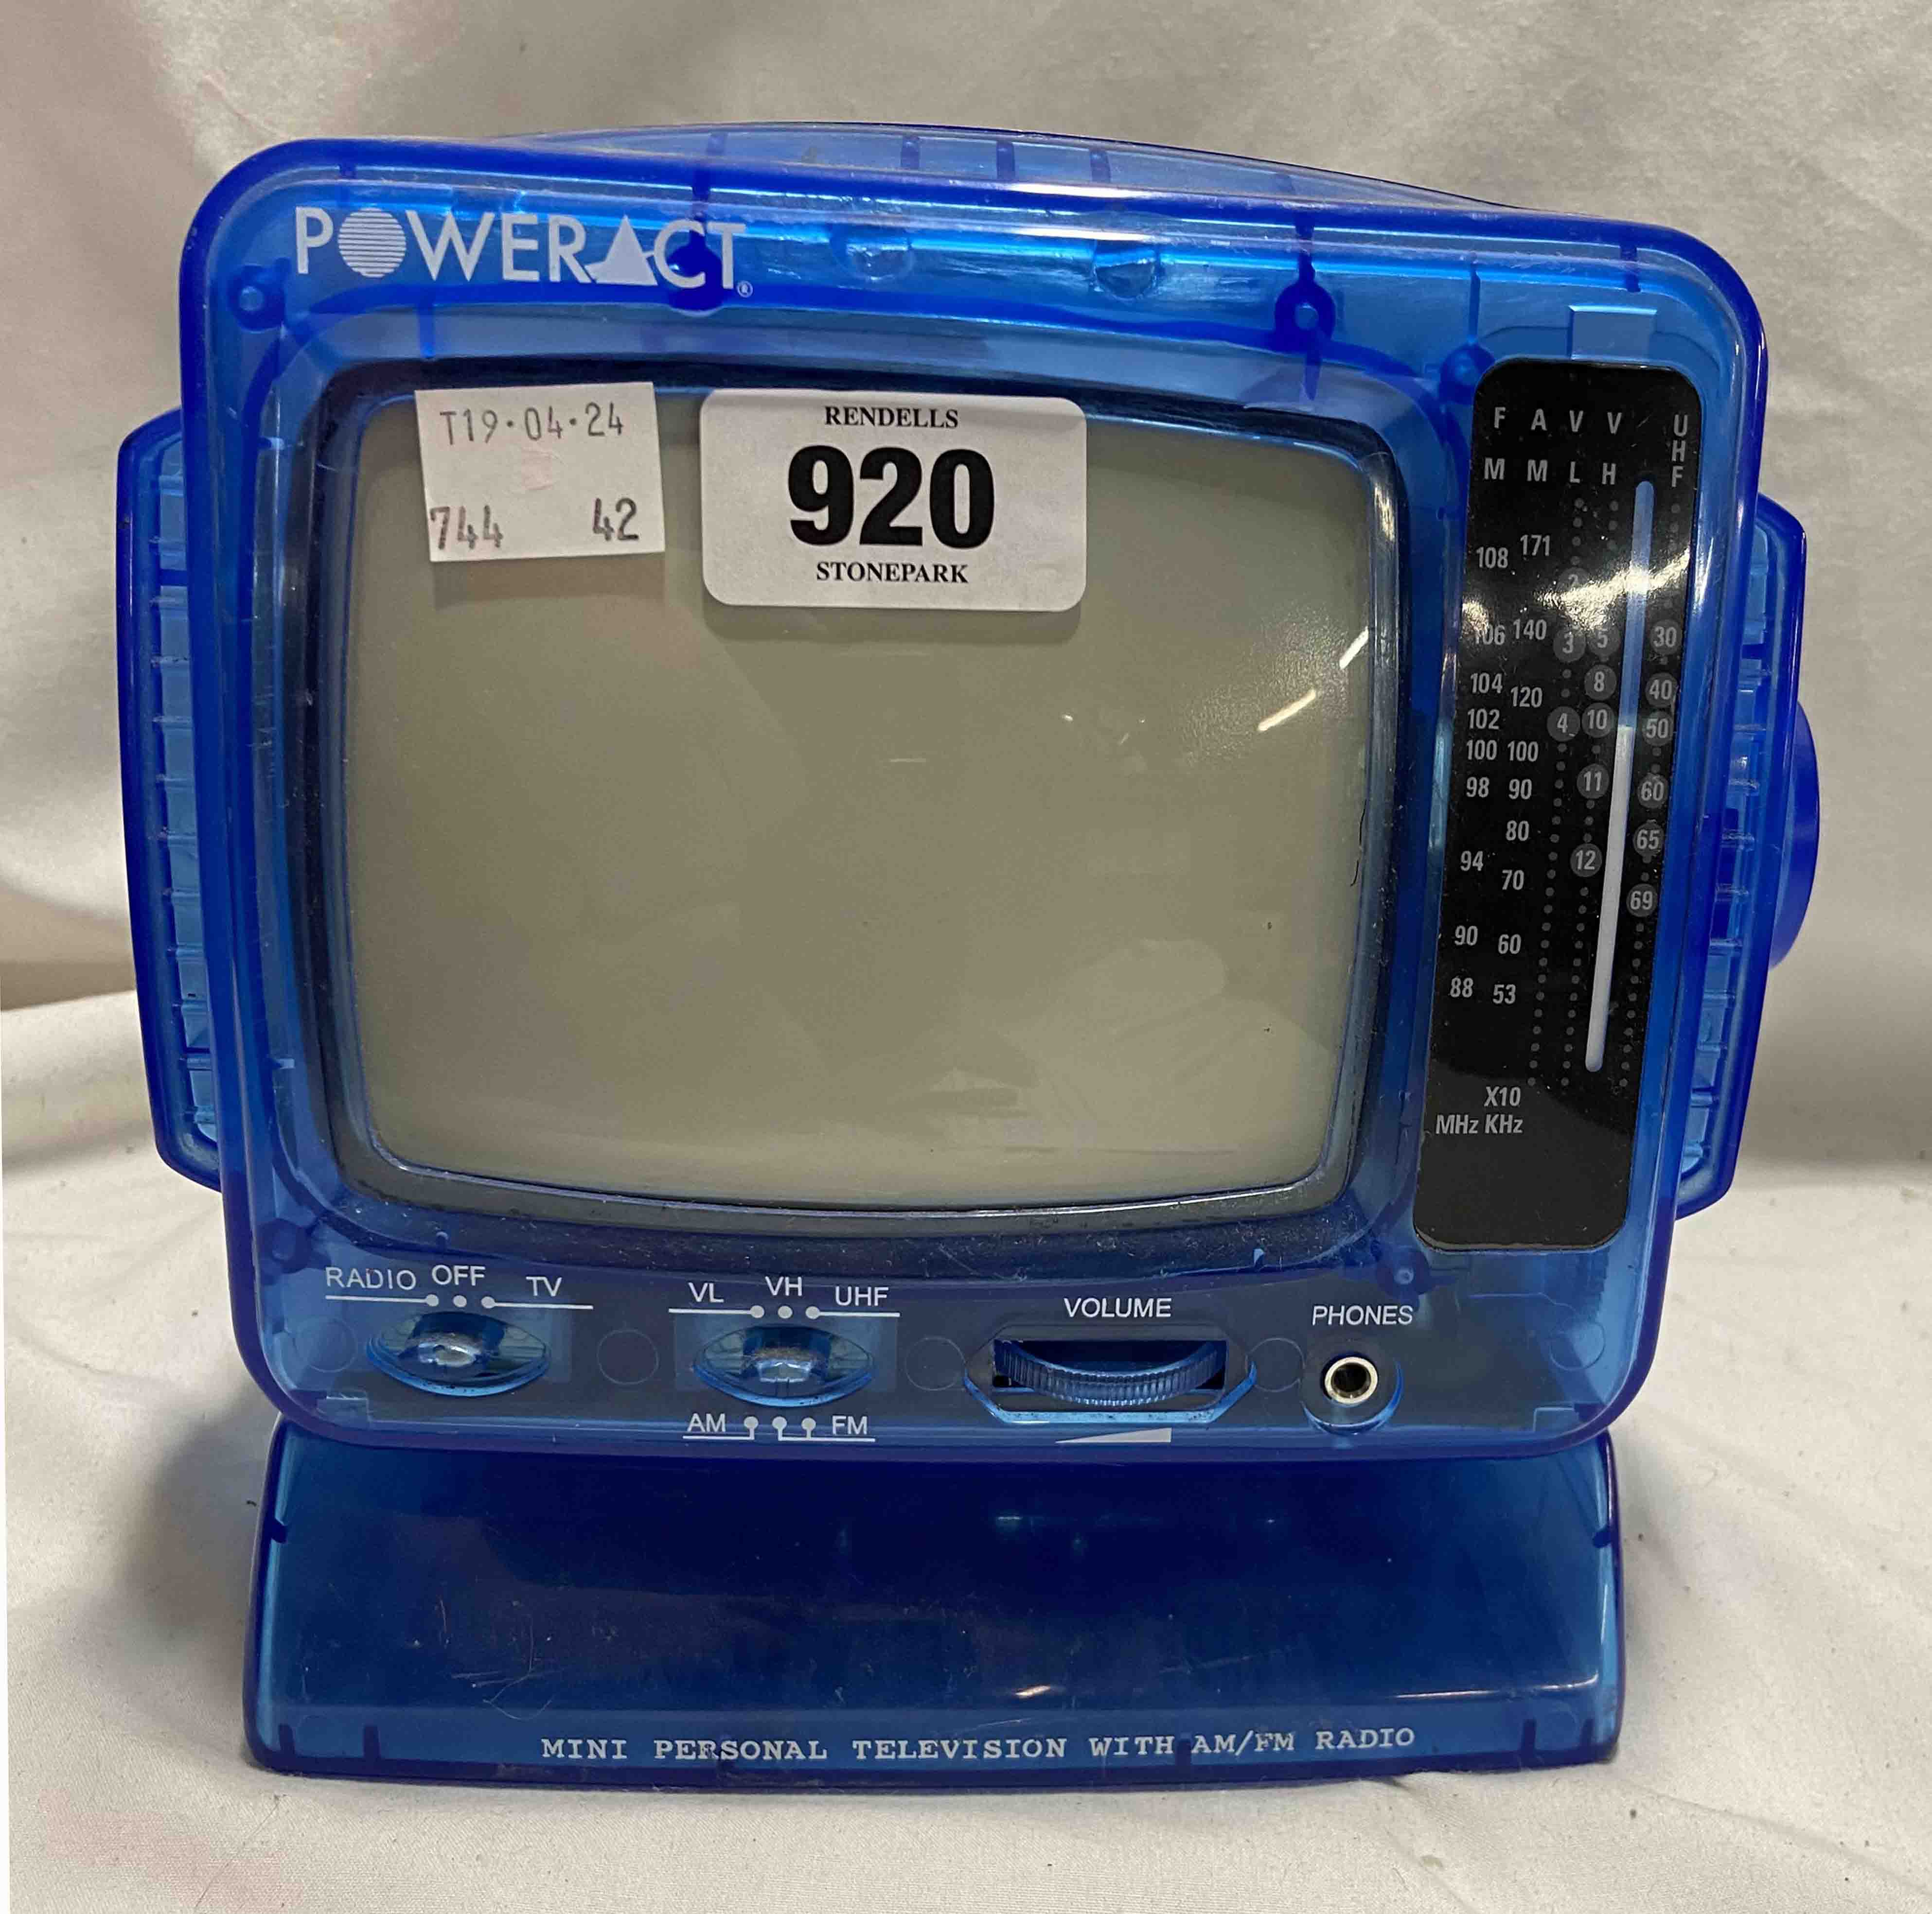 A vintage Power Act mini personal television with AM/FM radio